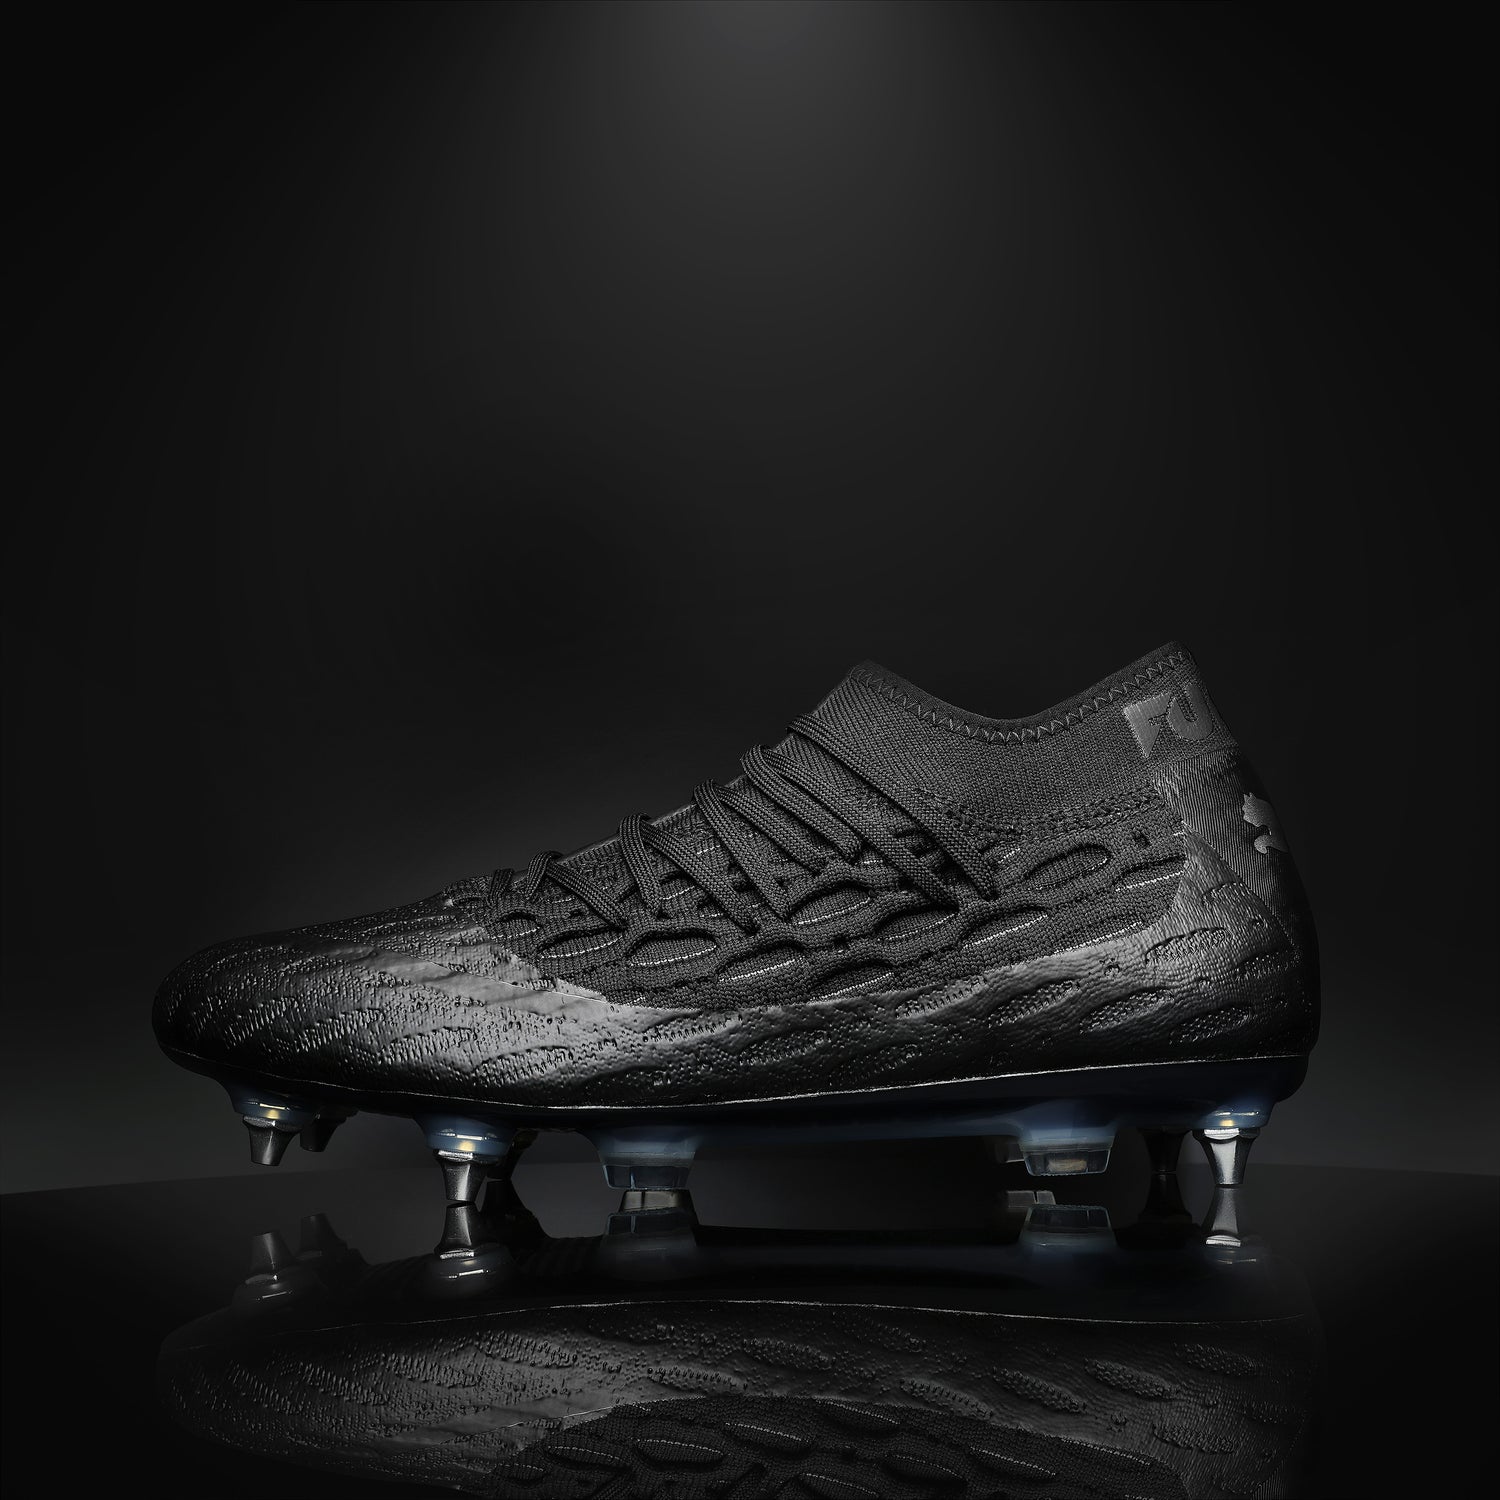 Puma soccer boot product photography